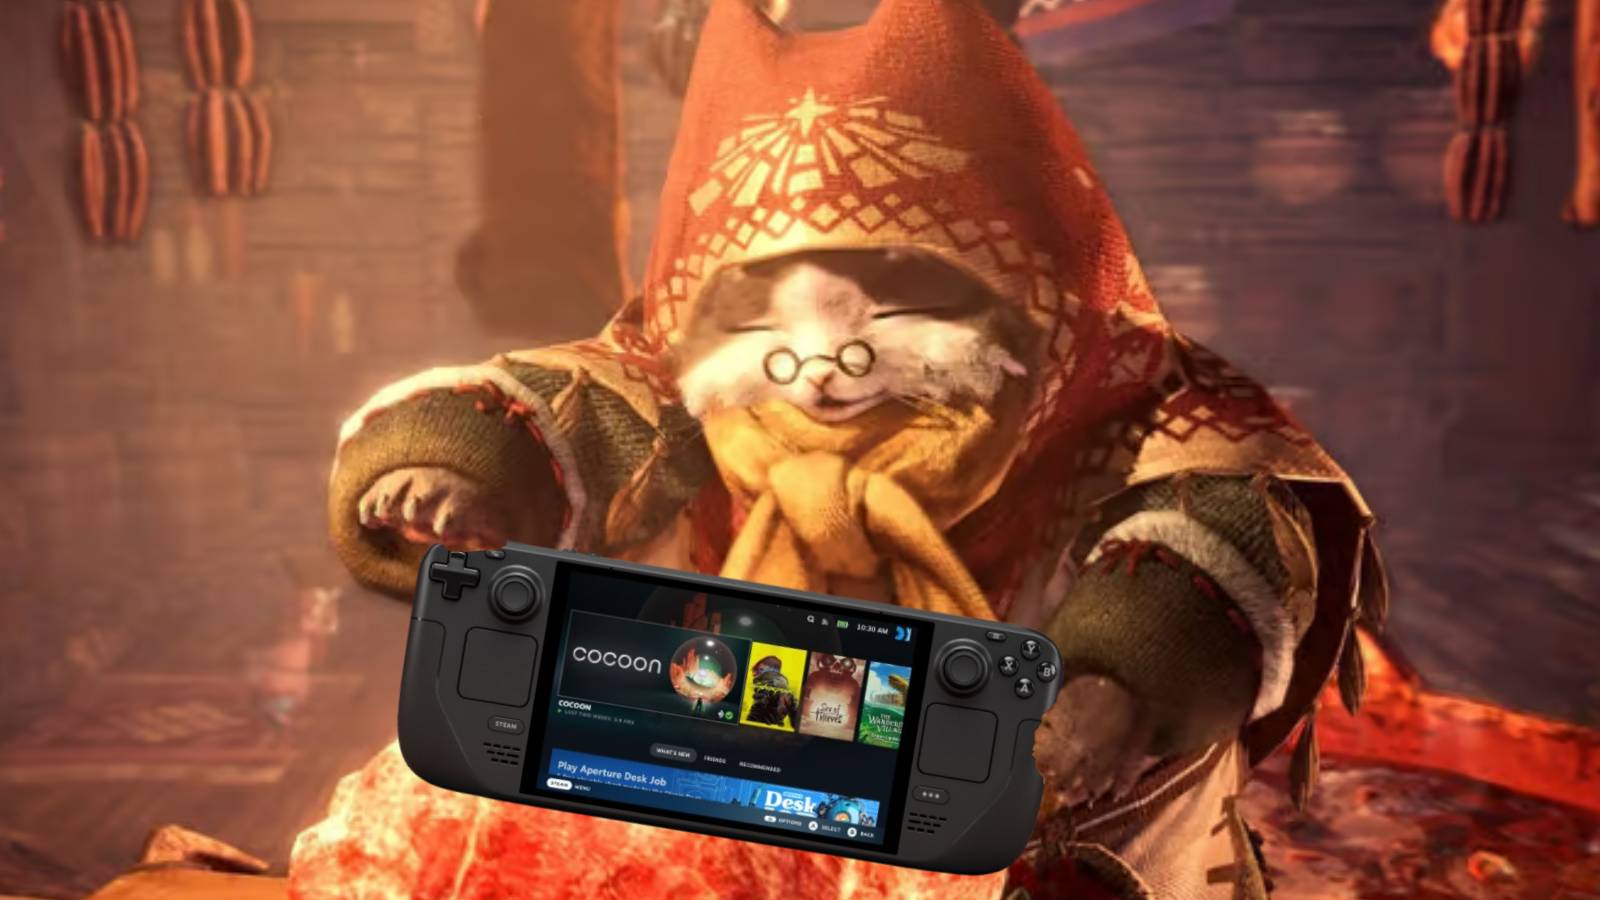 An image of a Palico from Monster Hunter World holding a Steam Deck.